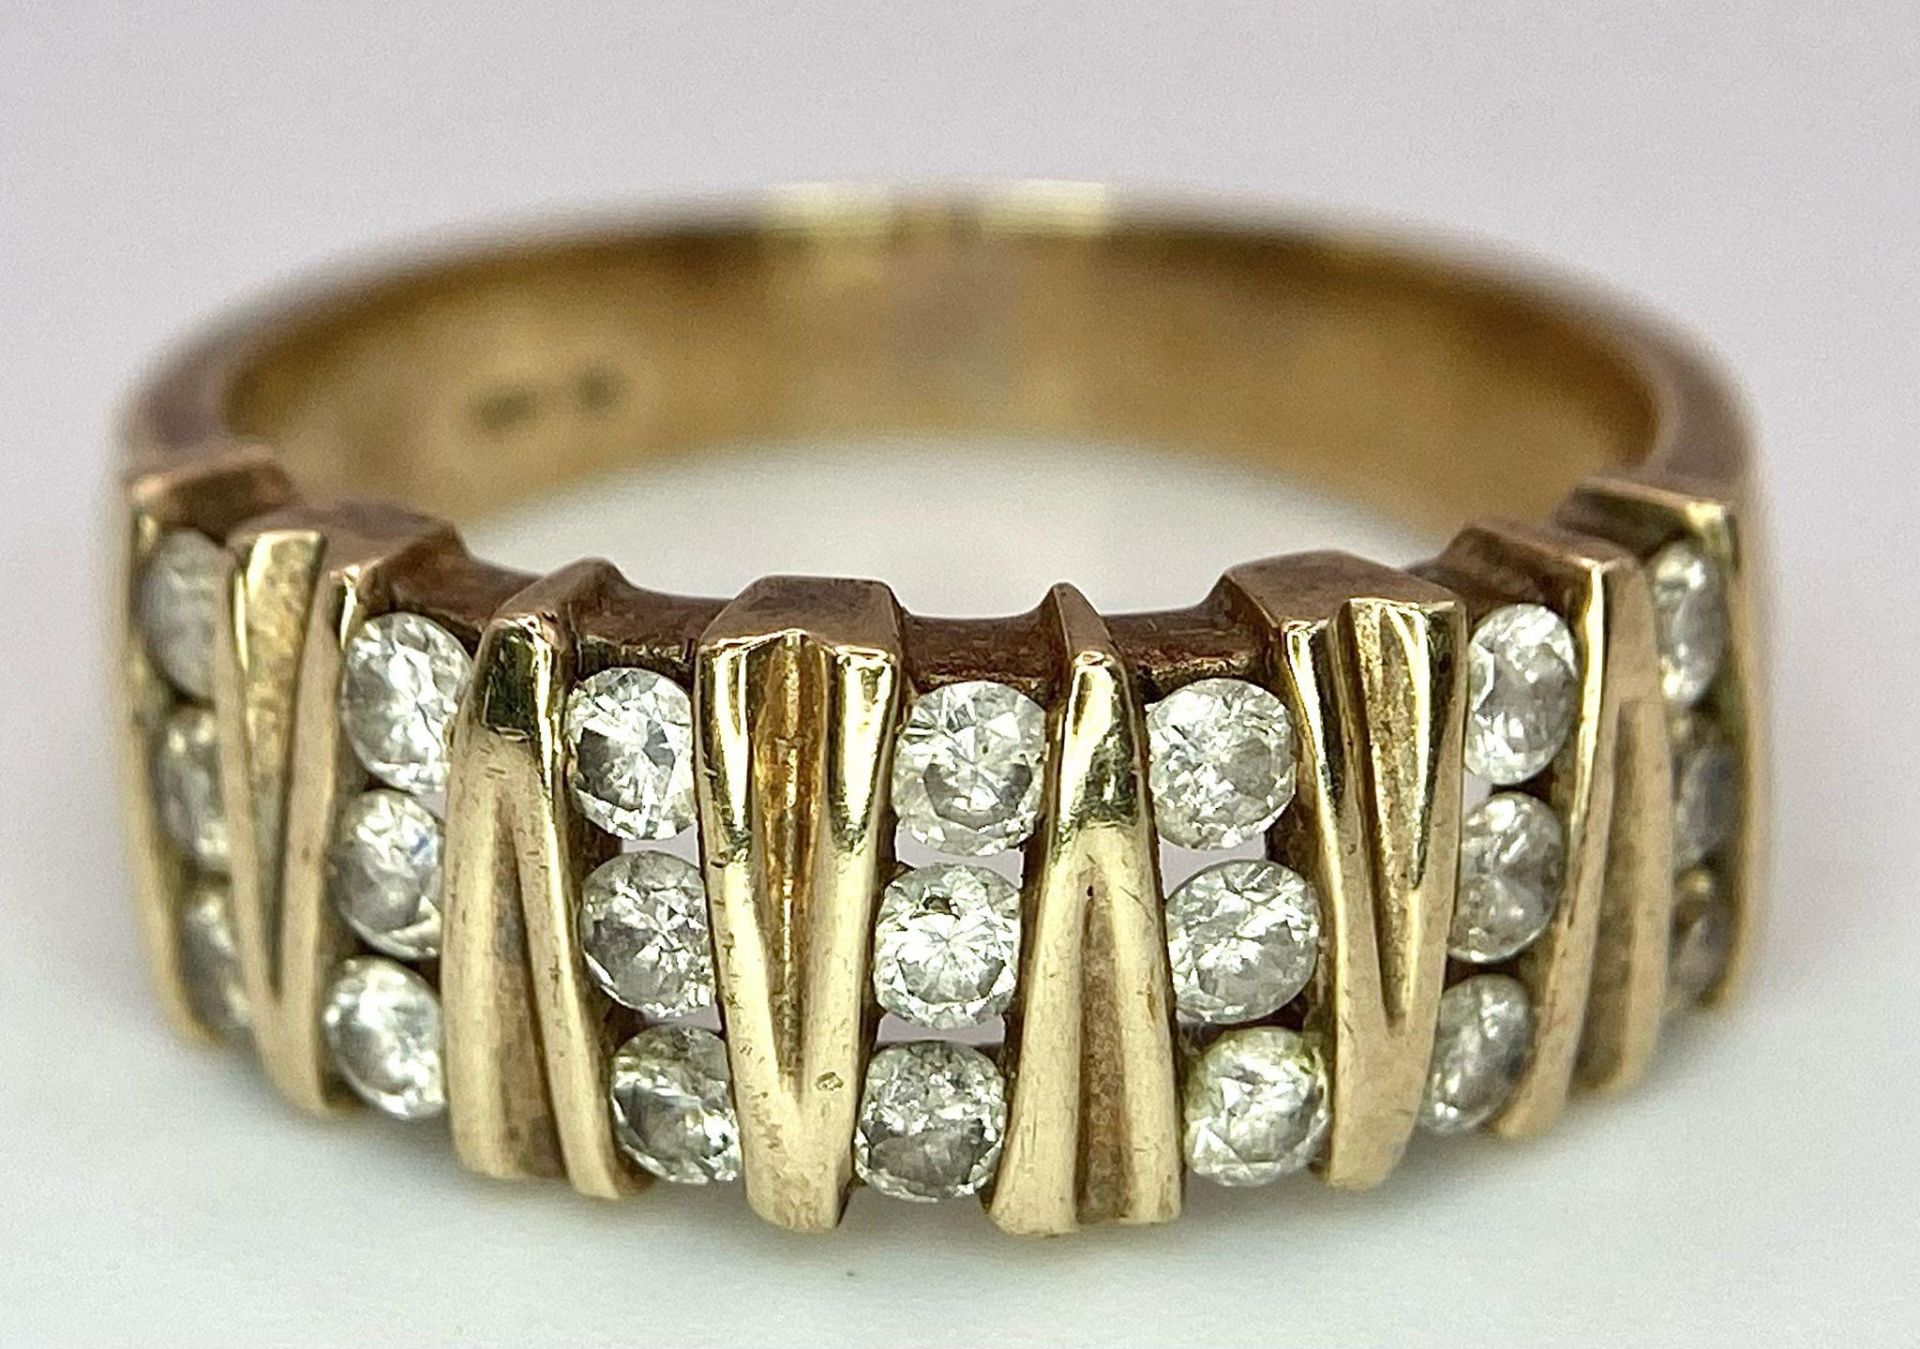 A Vintage 9K Yellow Gold 21 Diamond Ring. 1ctw of brilliant round cut diamonds. Size T. 5.9g total - Image 4 of 7